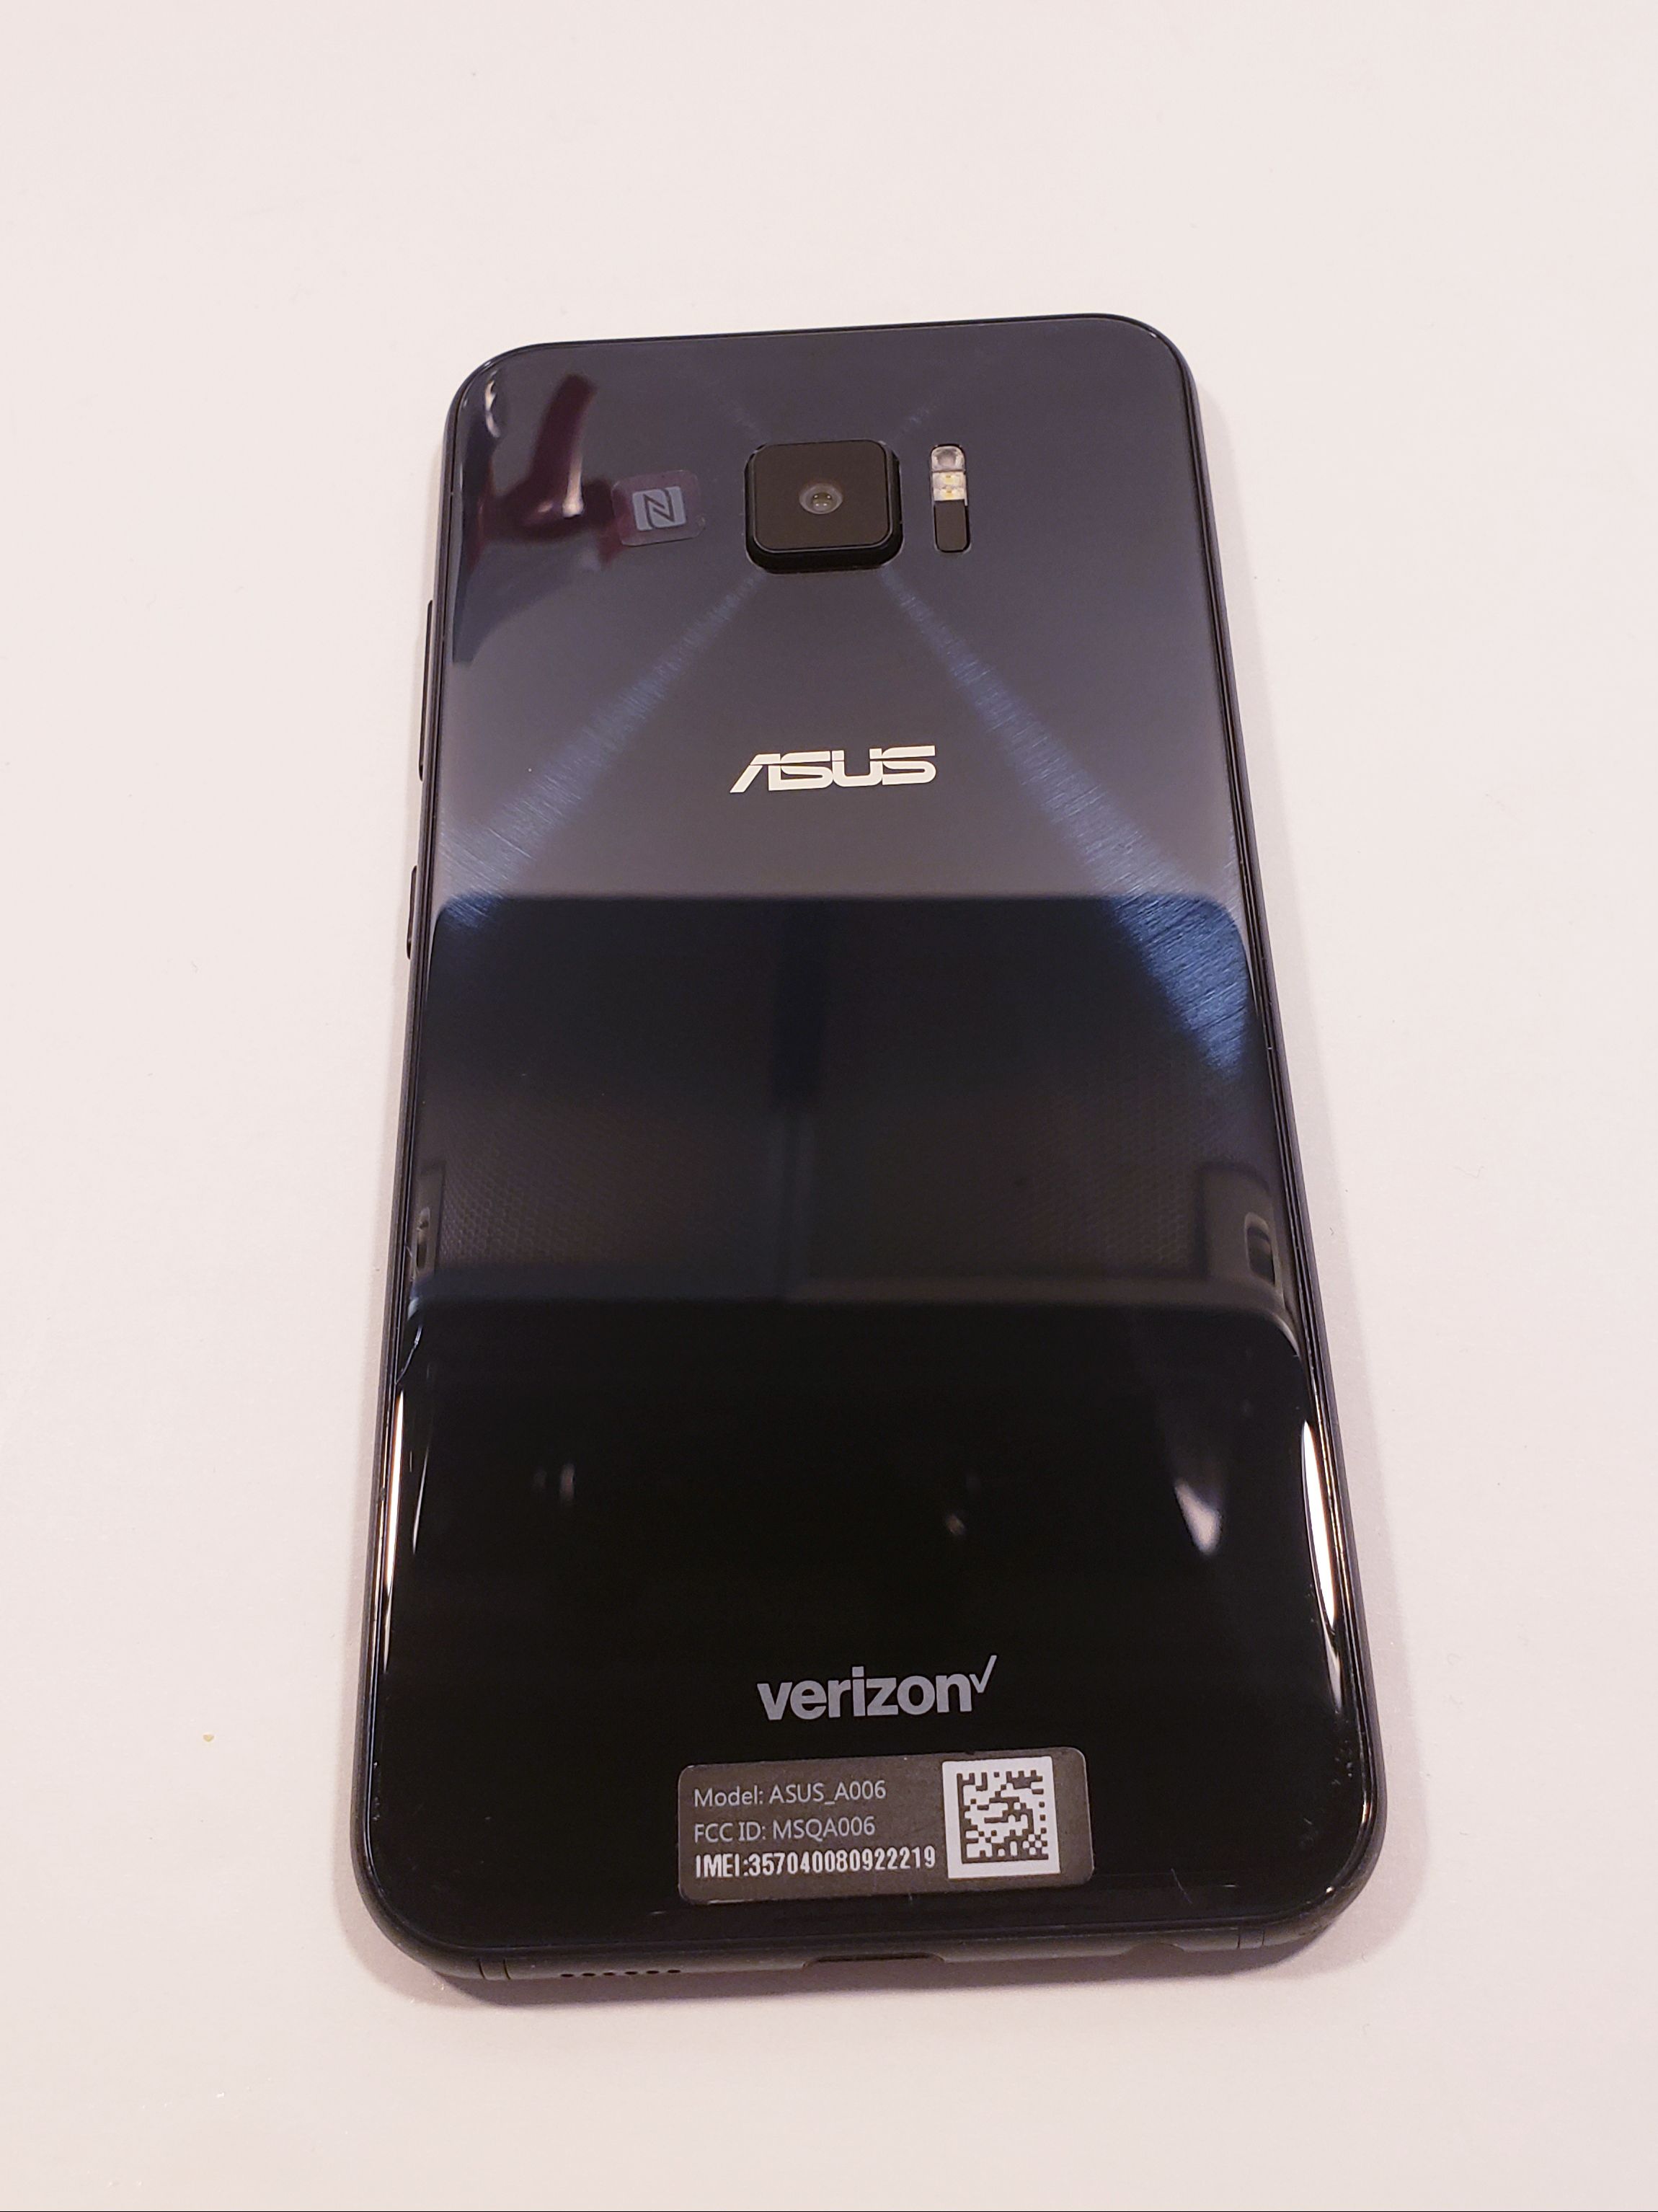 ASUS ZENFONE V - Android OS - Like New - Unlocked